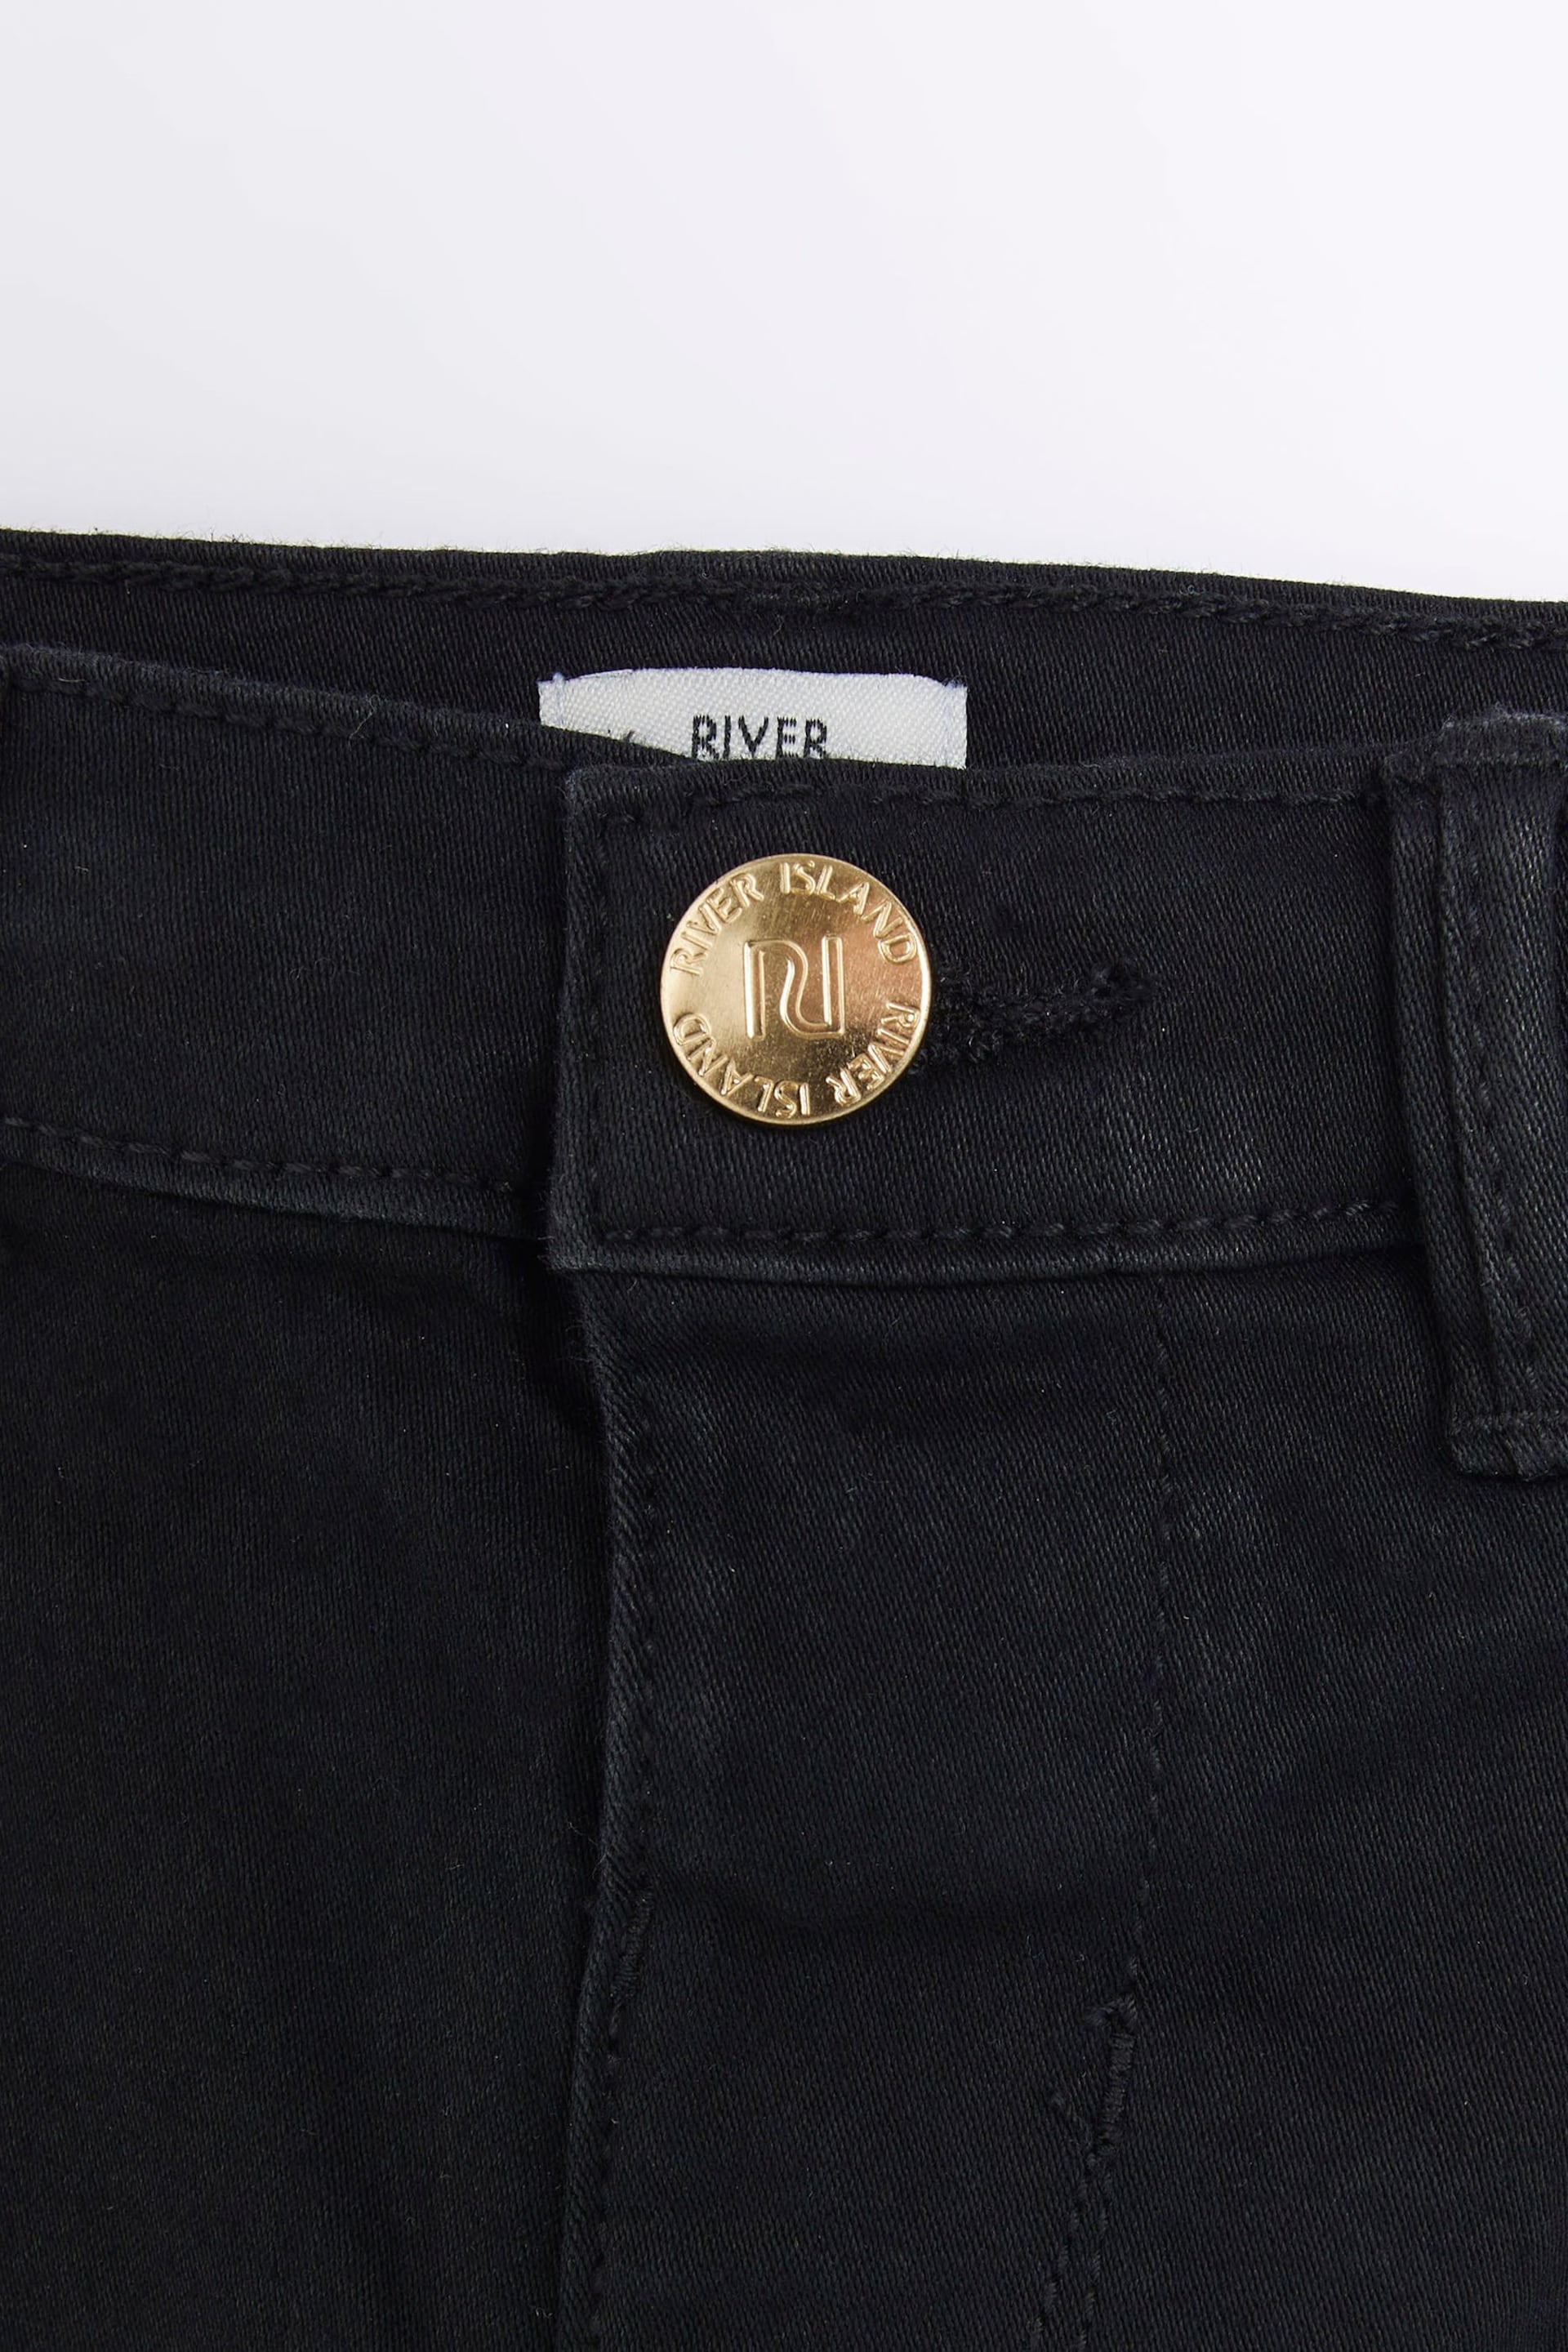 River Island Black Molly Skinny Jeans - Image 3 of 4